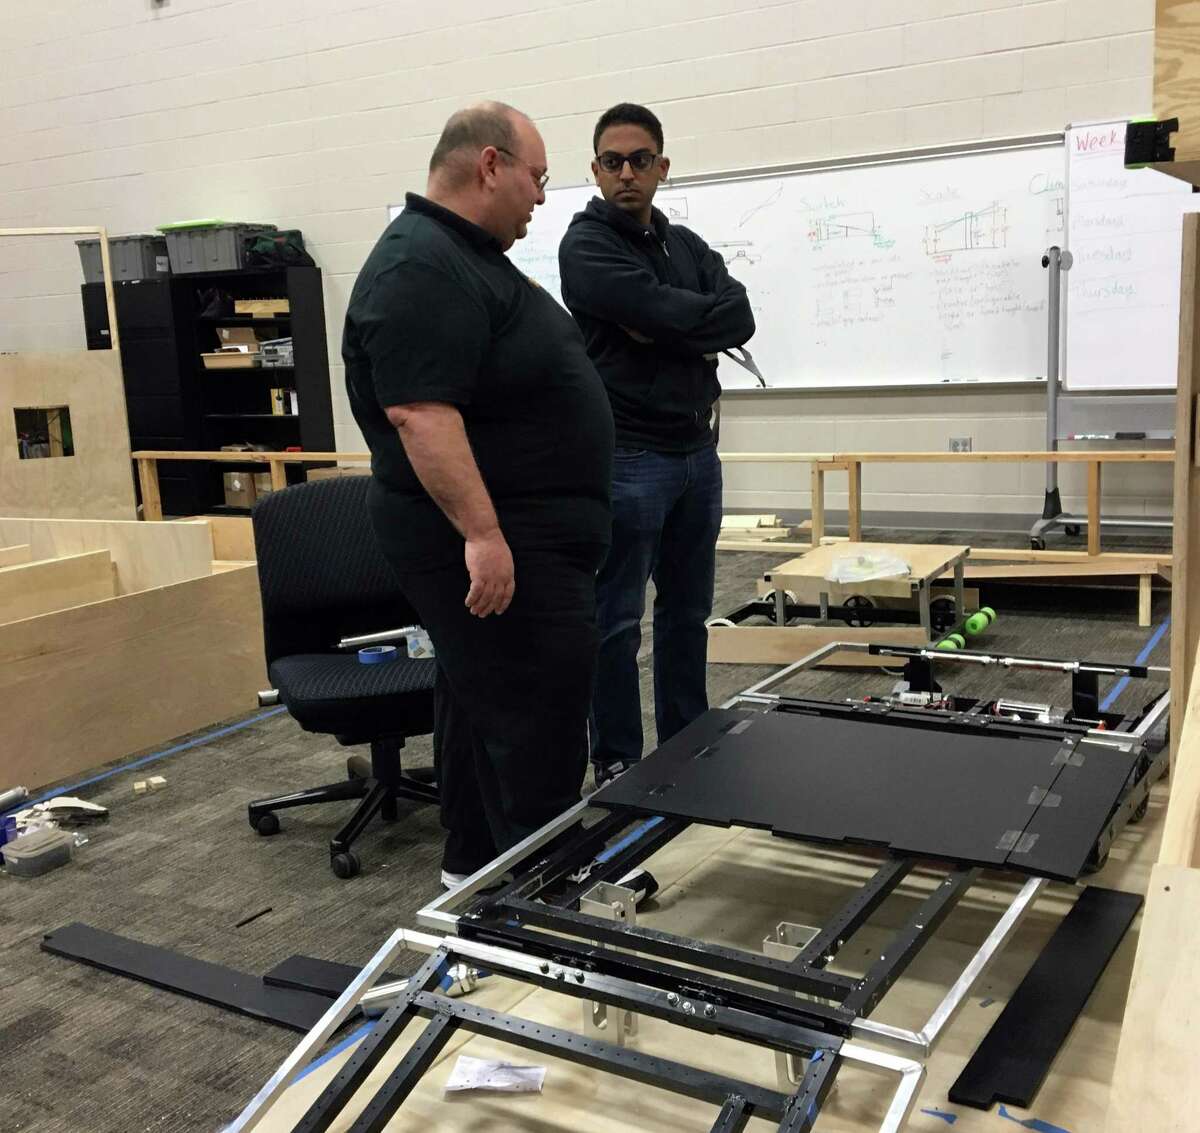 David Scarcella, an instructor with the Pasadena Independent School District, and Josh Sooknanan, a robotics engineer with NASA, discuss a prototype robot built by the district's FIRST Robotics Team High Voltage. Scarcella coaches and Sooknanan mentors high school students participating in a worldwide competition involving 3,400 teams. The global championship will be held in Houston.